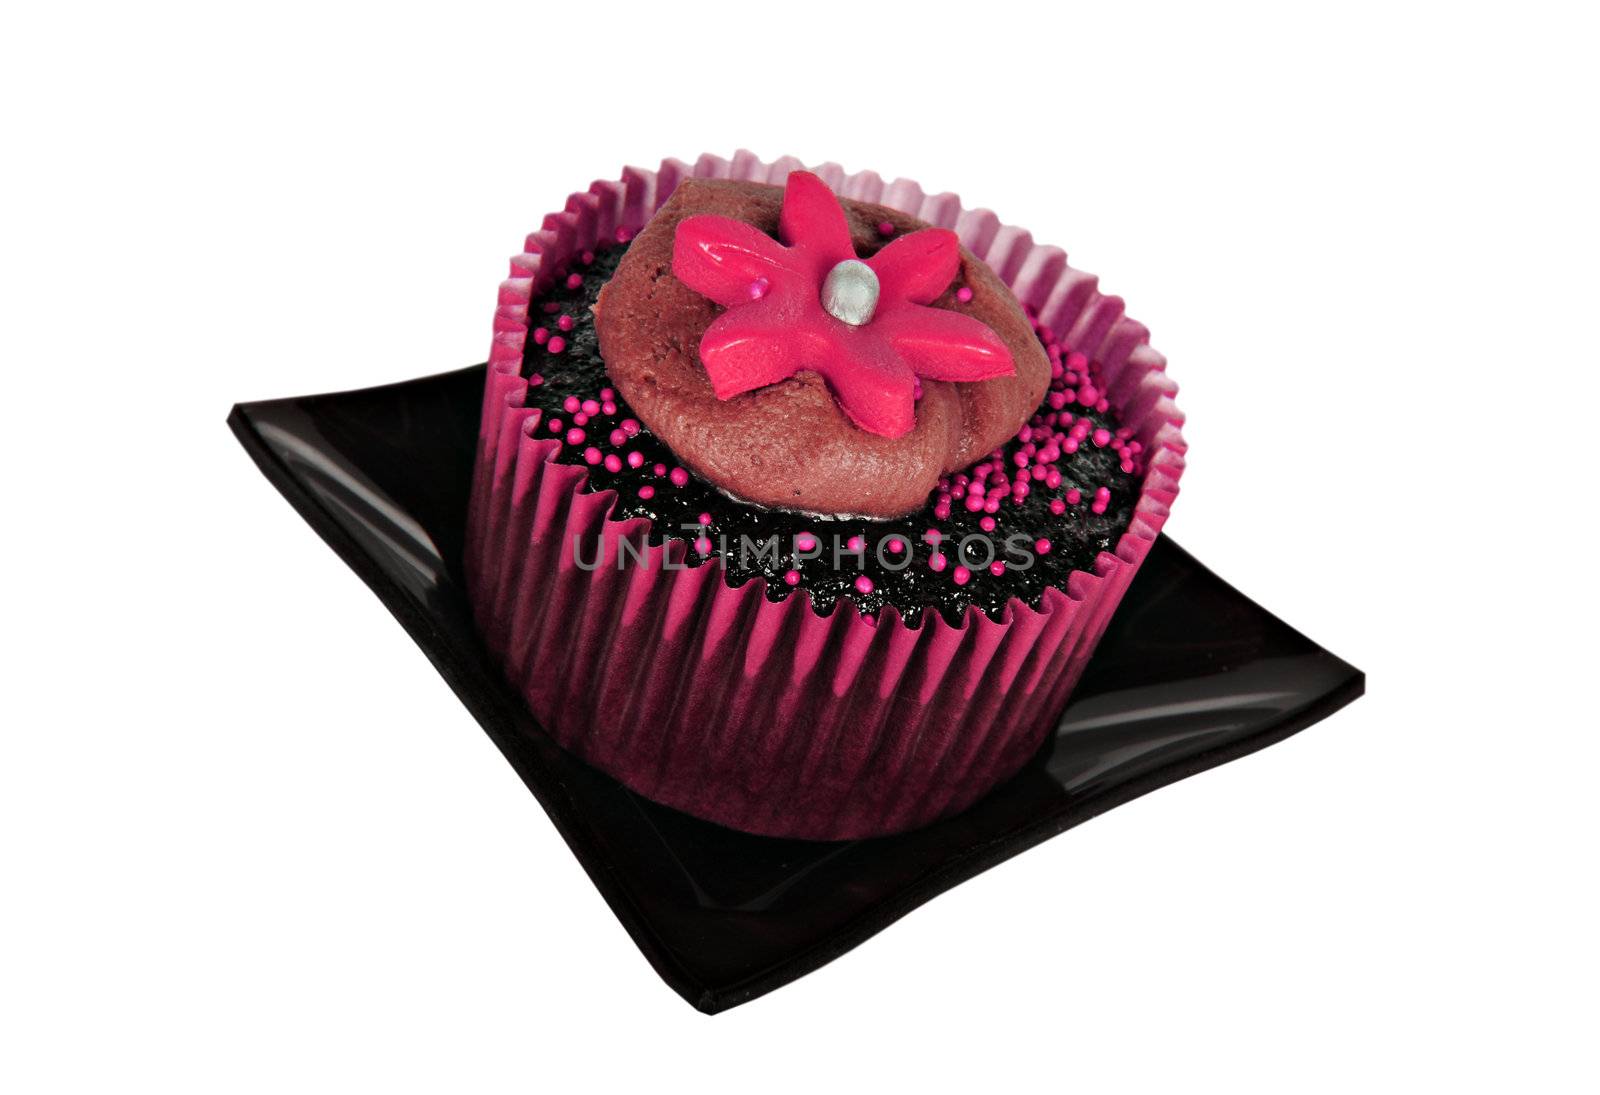 One chocolate cupcake with pink icing by tish1